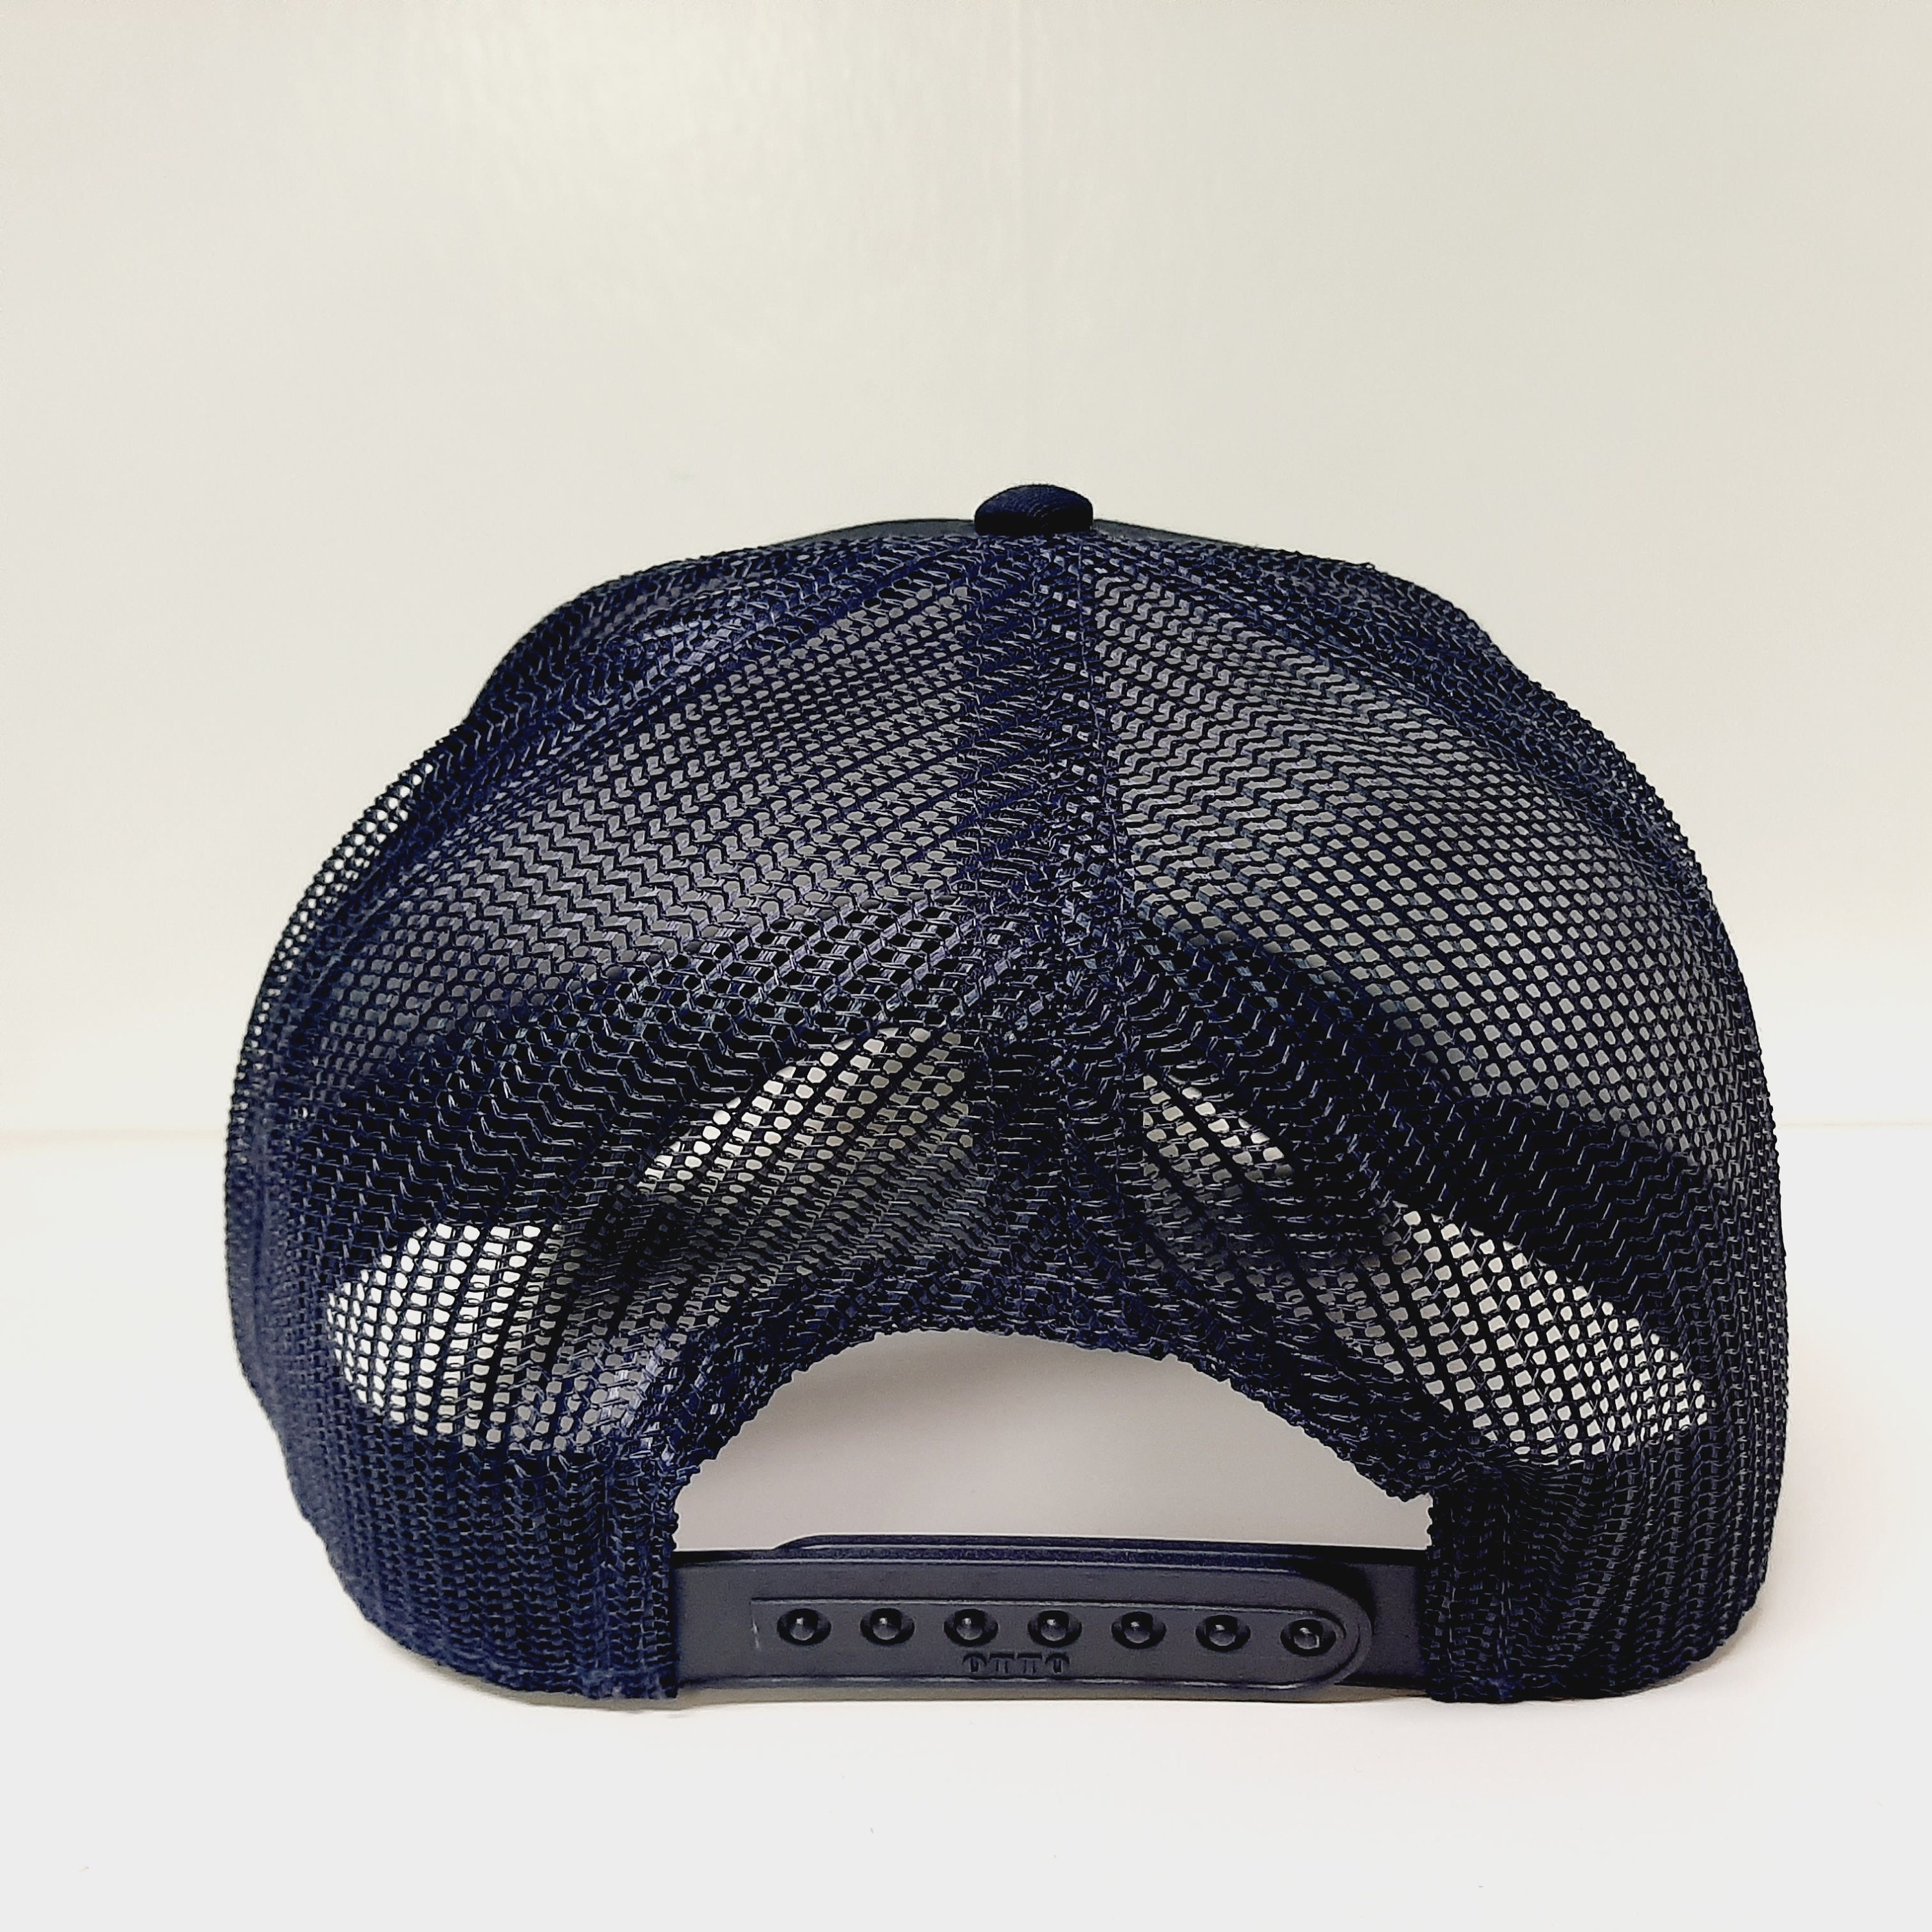 USS Bowfin SS-287 US Navy Baseball Cap Mesh Snapback Blue Embroidered Hat